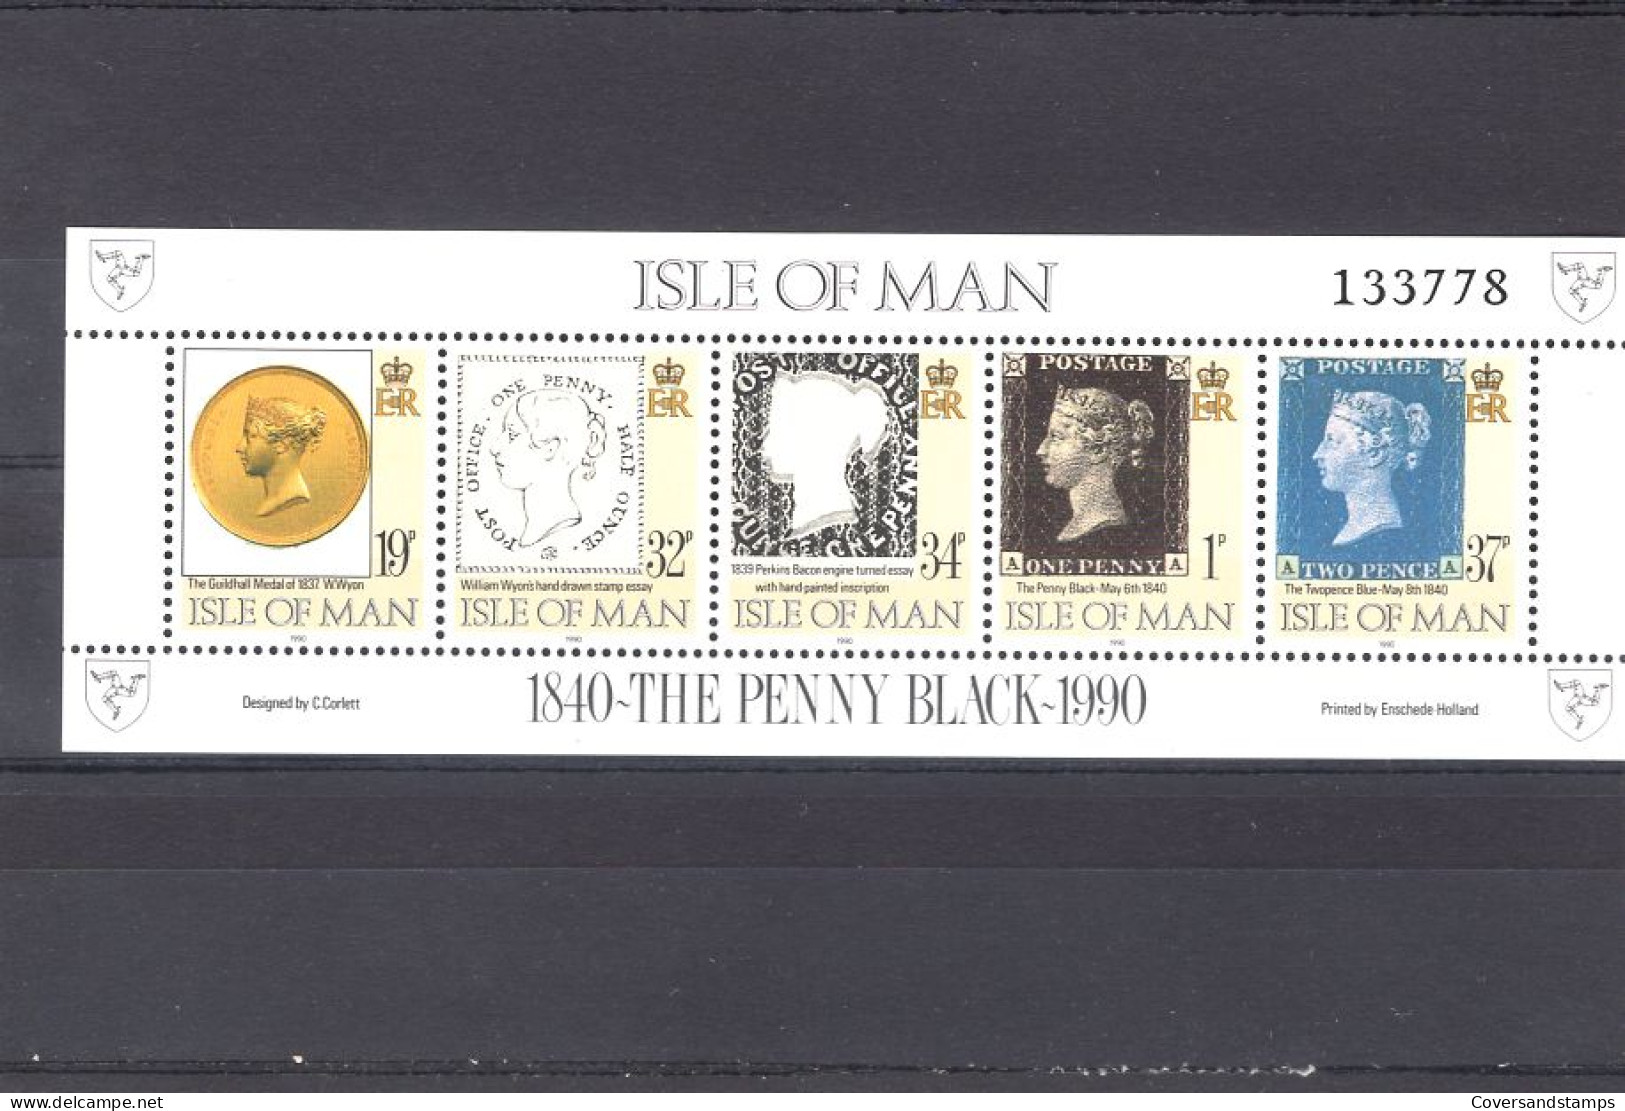  Isle Of Man : 150th Anniversary Of The Penny Black Sheetlet, MNH ** - Isola Di Man